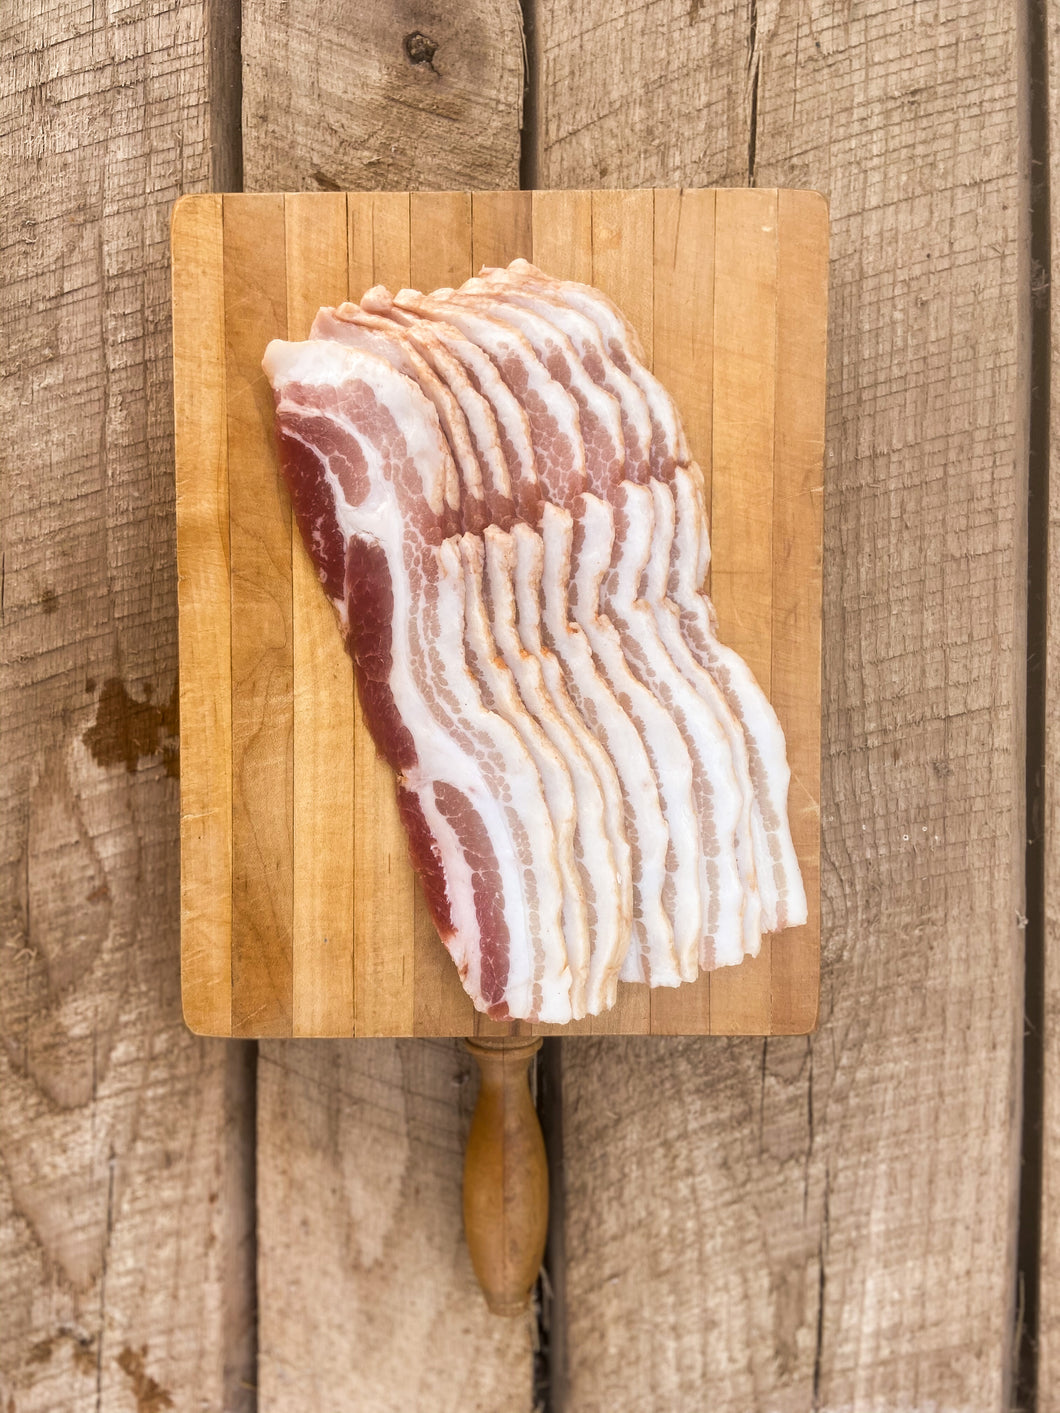 Uncured Hickory Smoked Belly Bacon